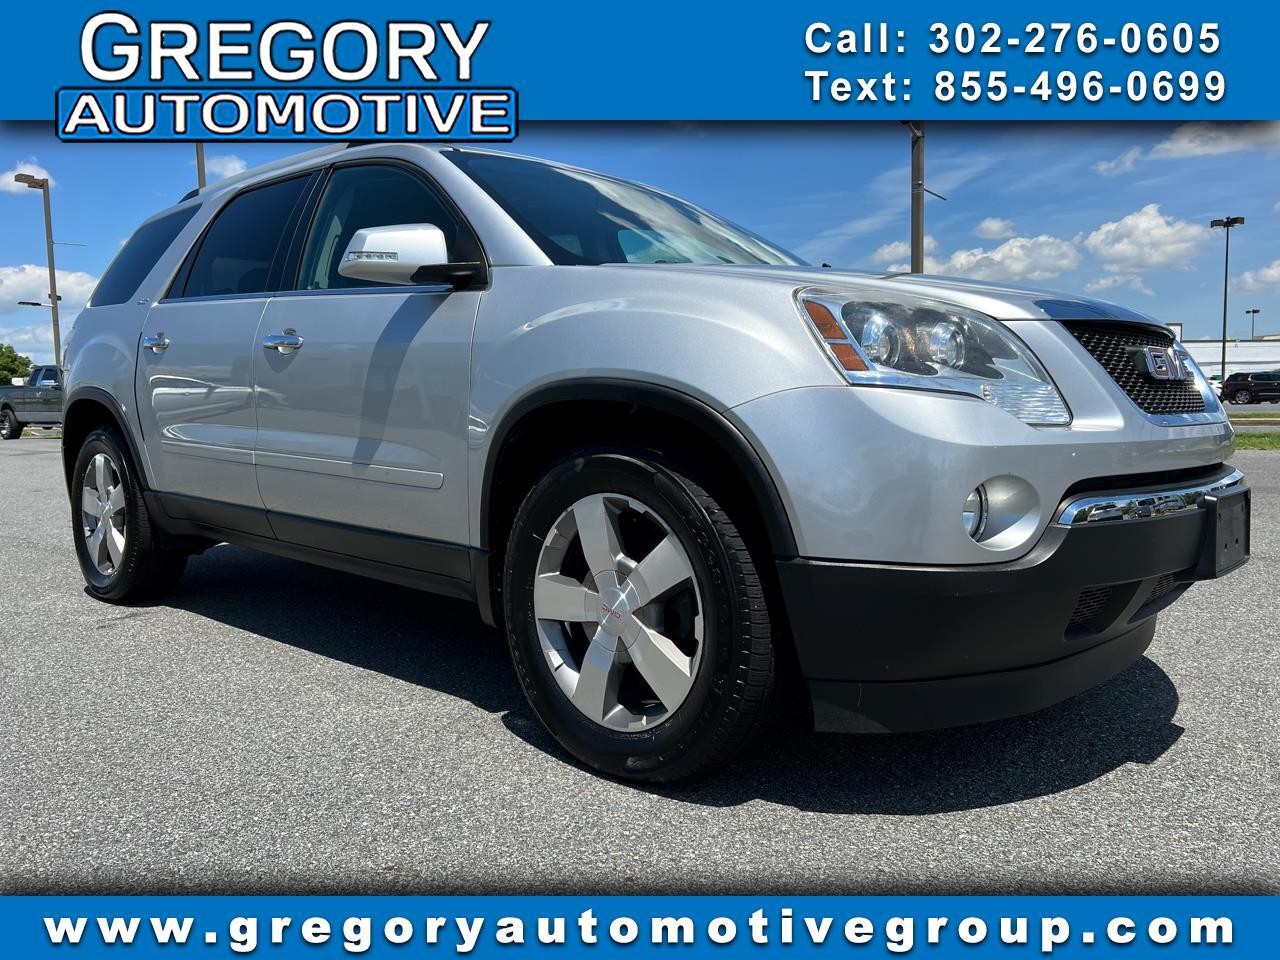 Used 2011 GMC Acadia AWD 4dr SLT1 for Sale in New Castle DE 19720